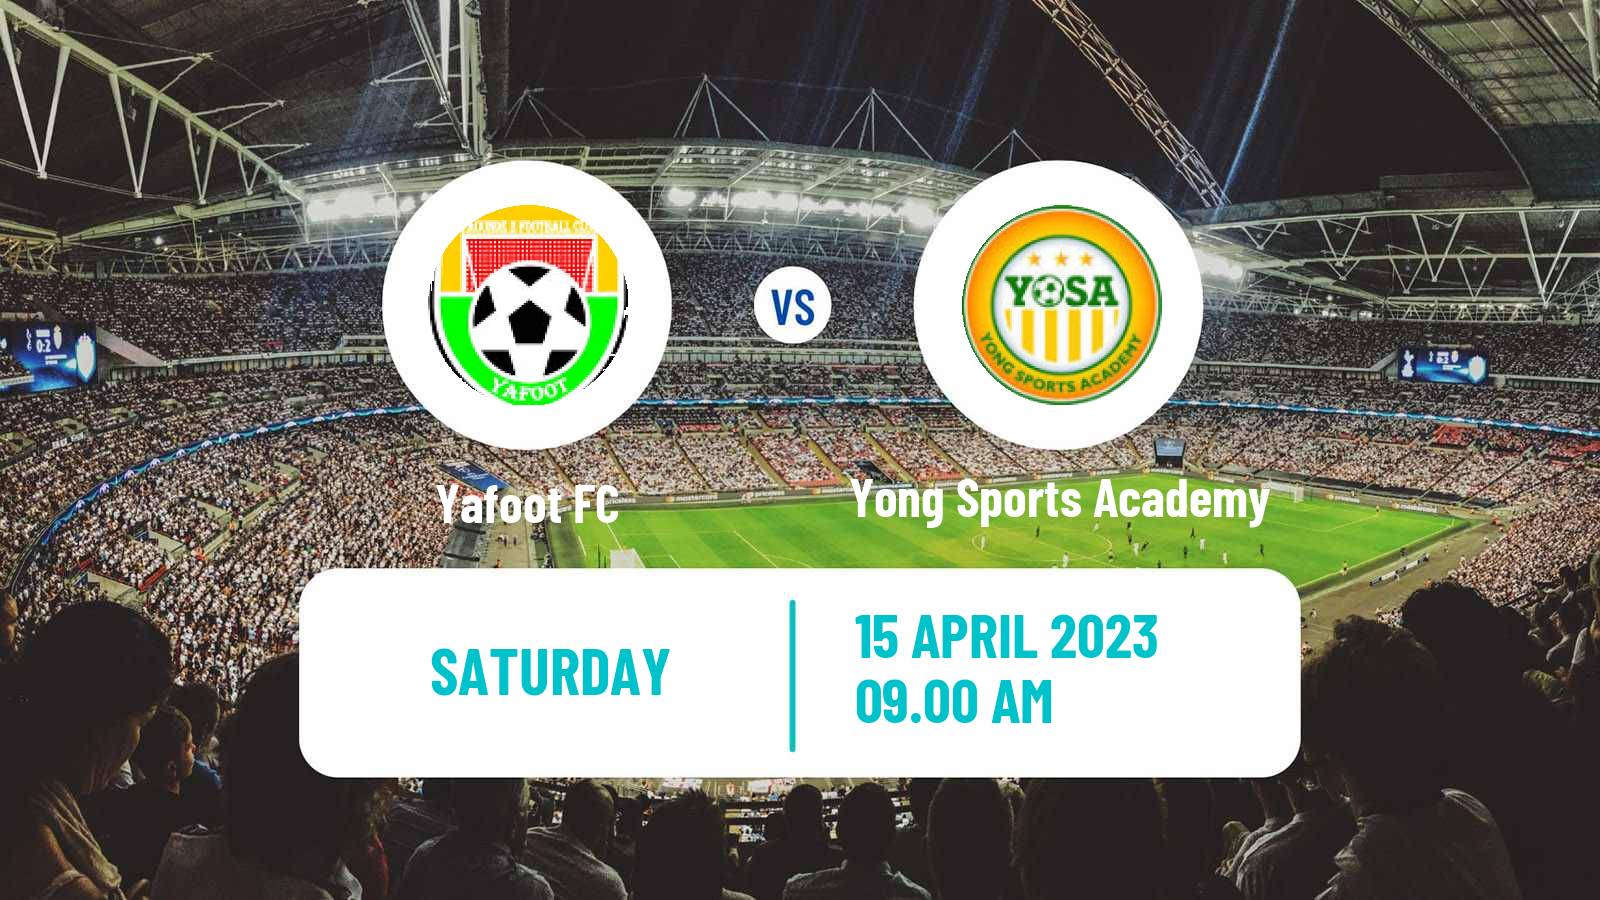 Soccer Cameroon Elite One Yafoot - Yong Sports Academy